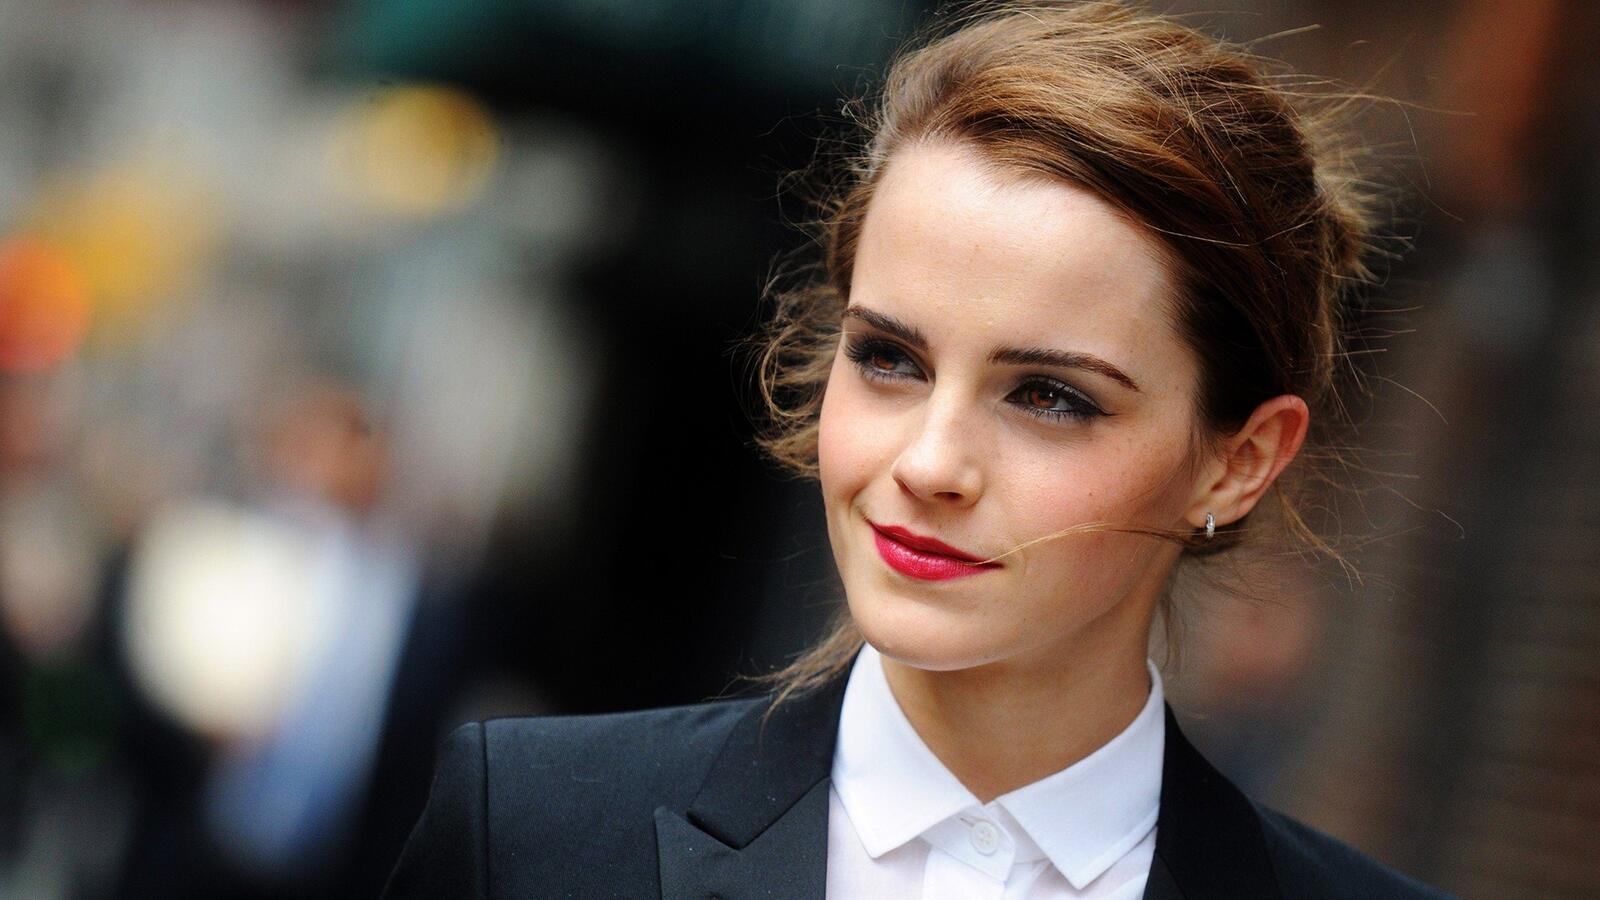 Free photo Emma Watson smiles with red lipstick on her lips